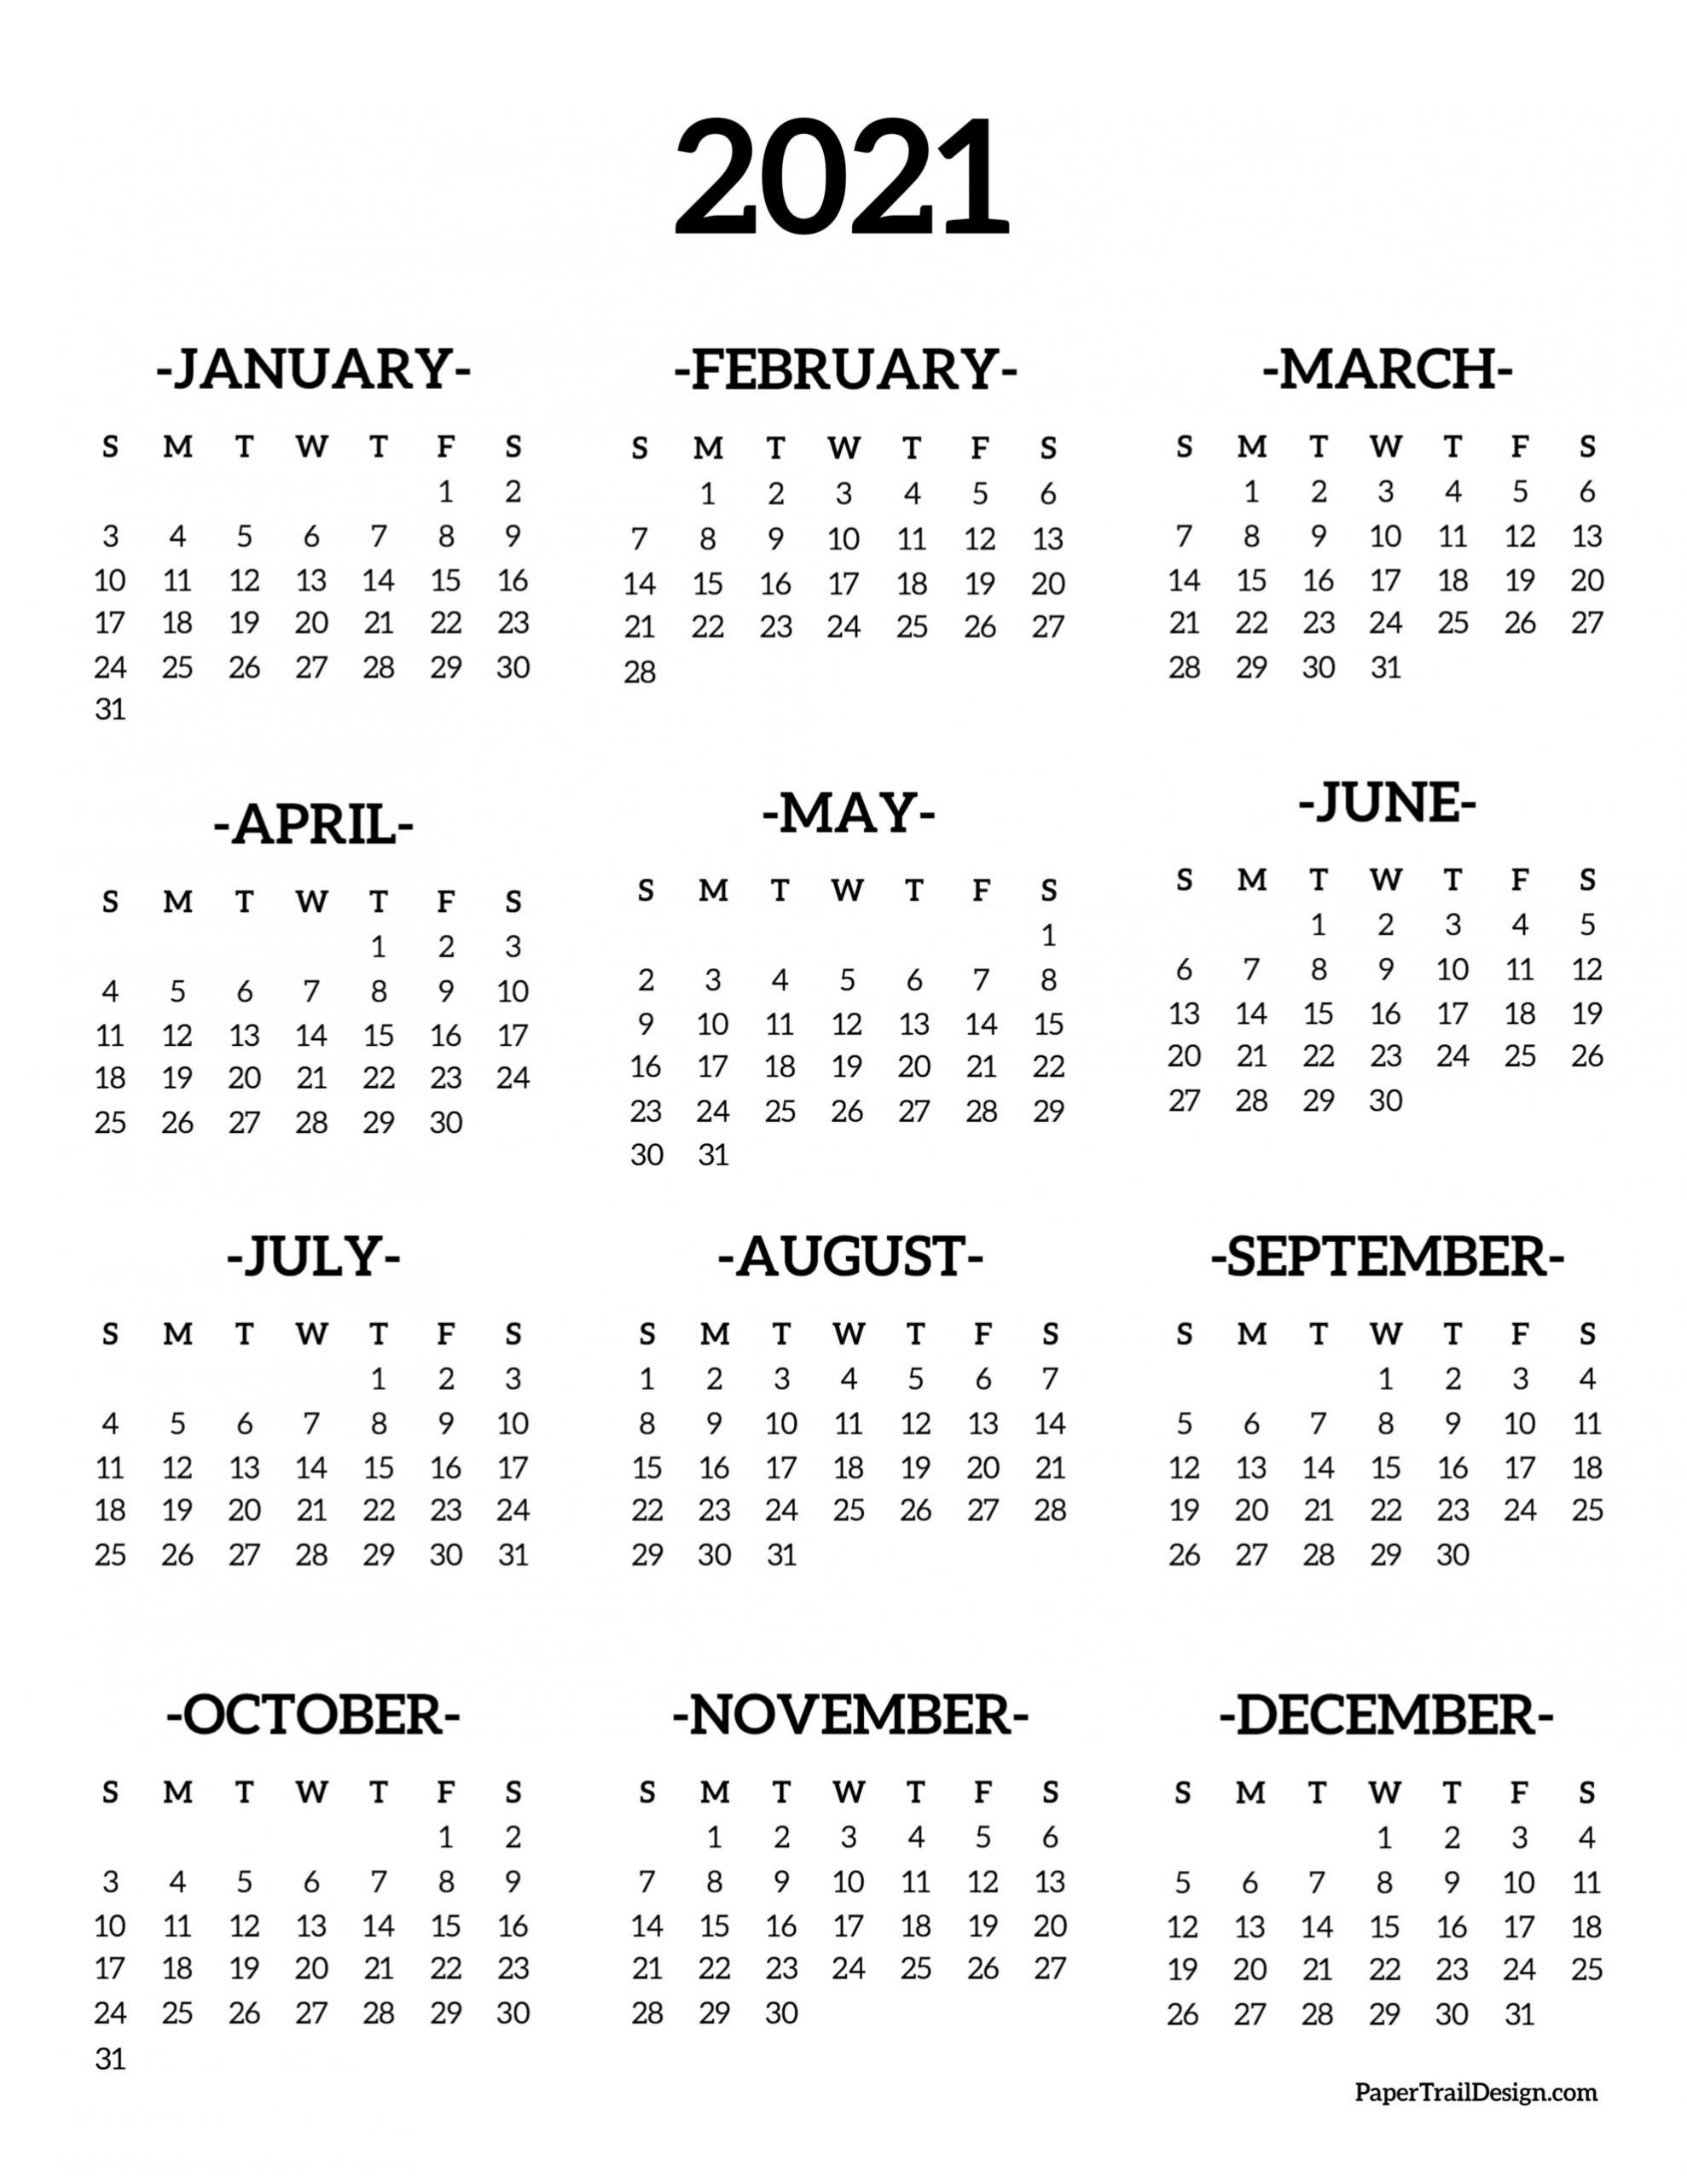 Calendar 2021 Printable One Page | Paper Trail Design  2021 Calendar Printable One Page Free